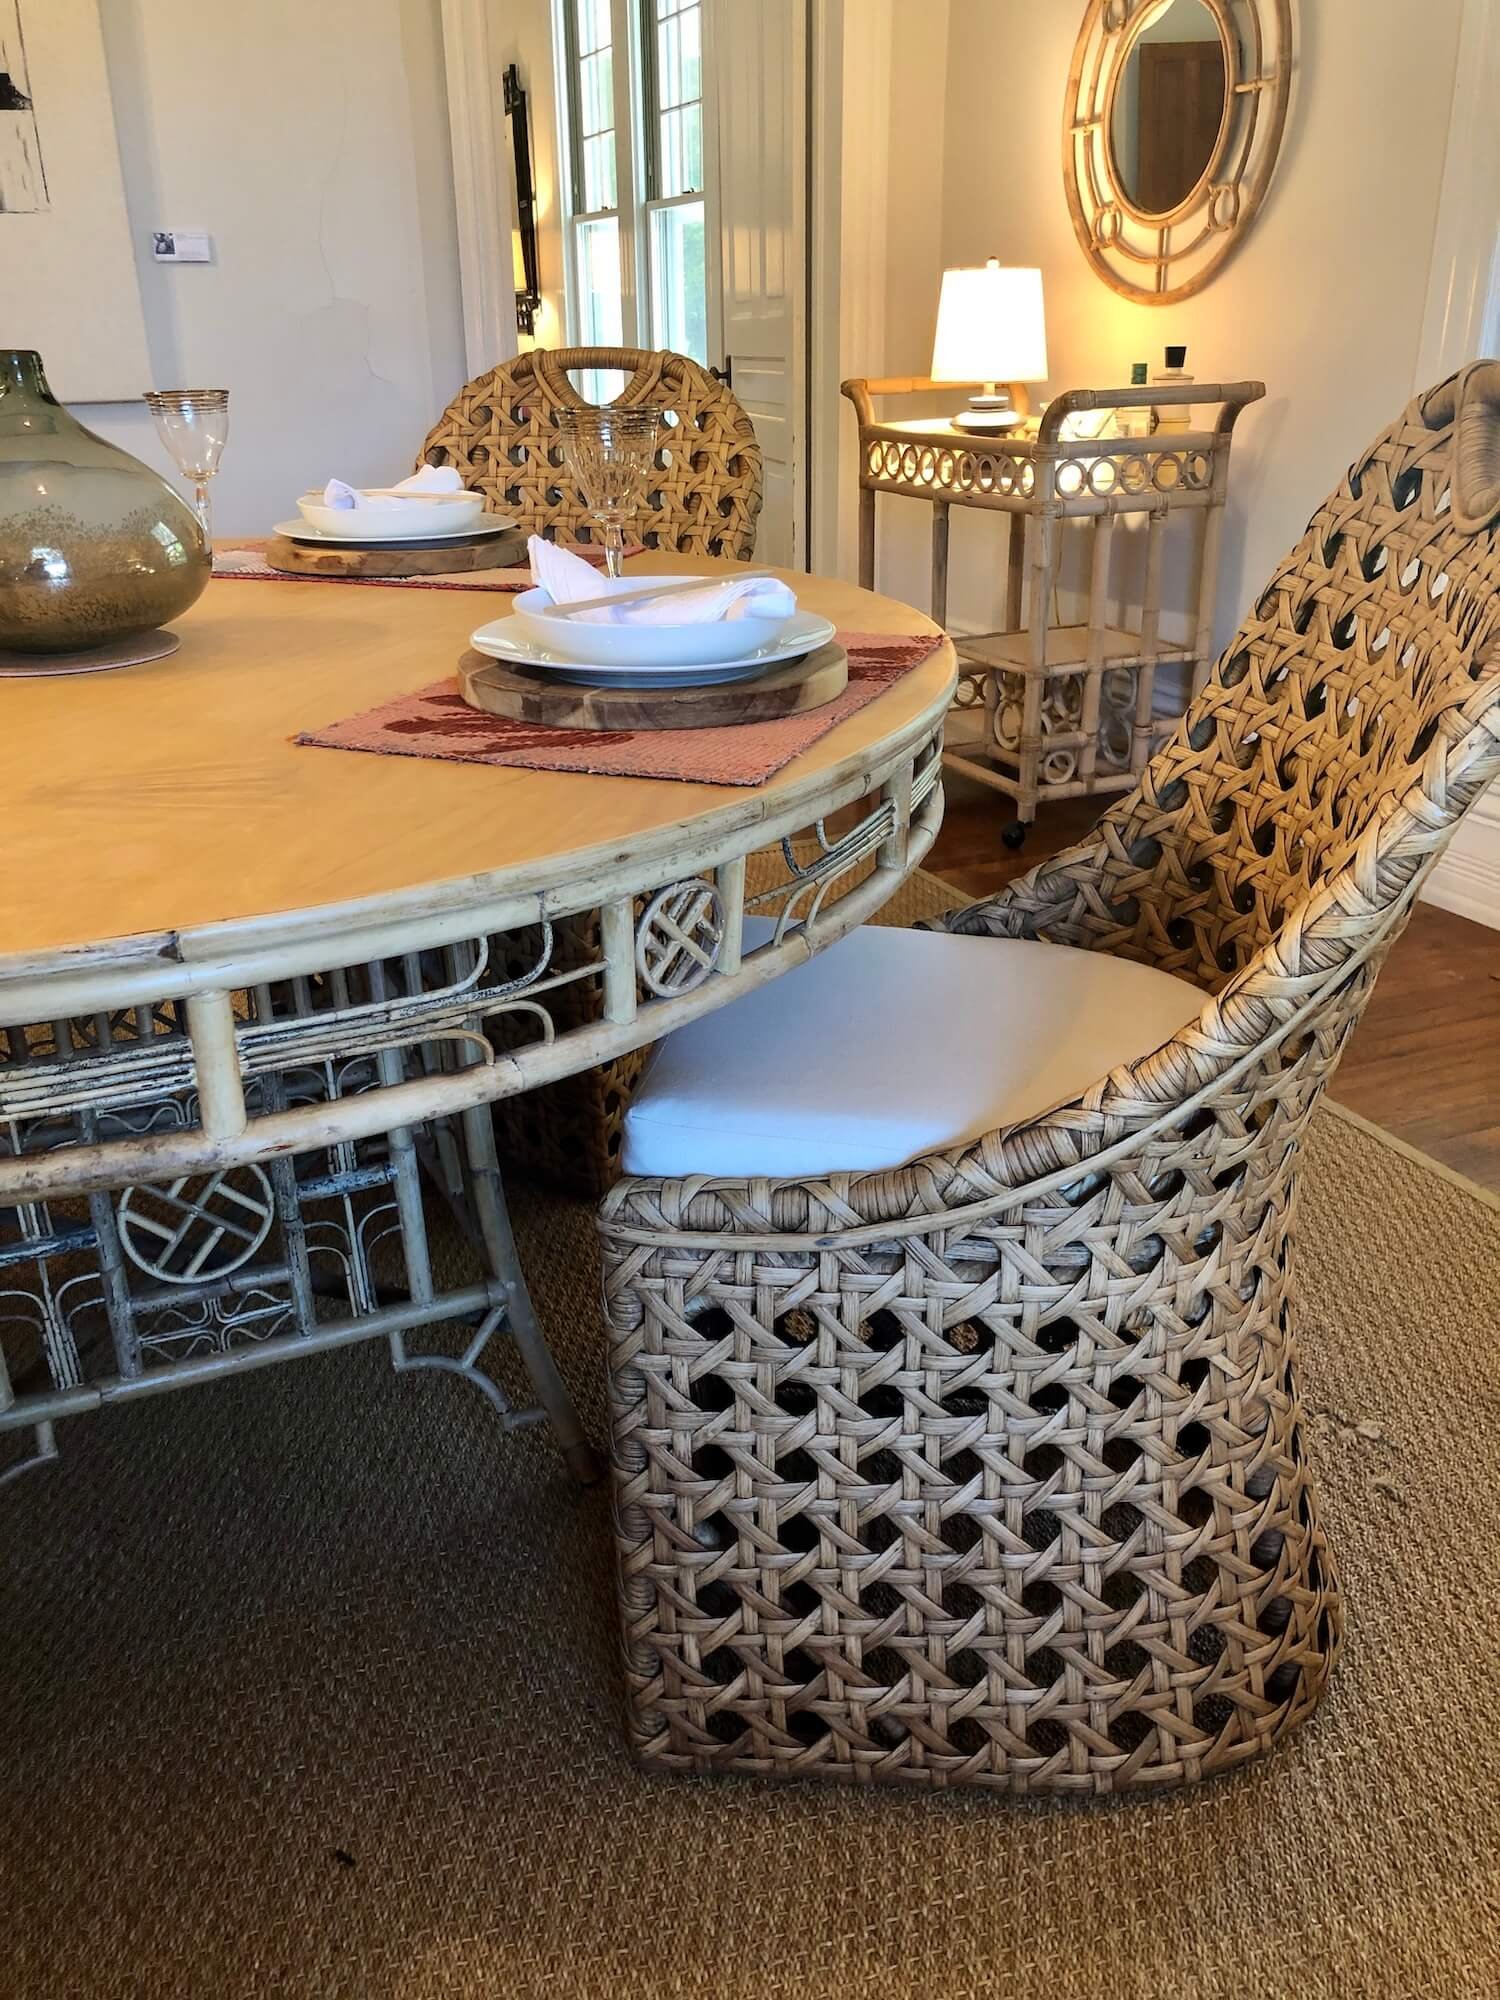 wicker and rattan at Red Egg